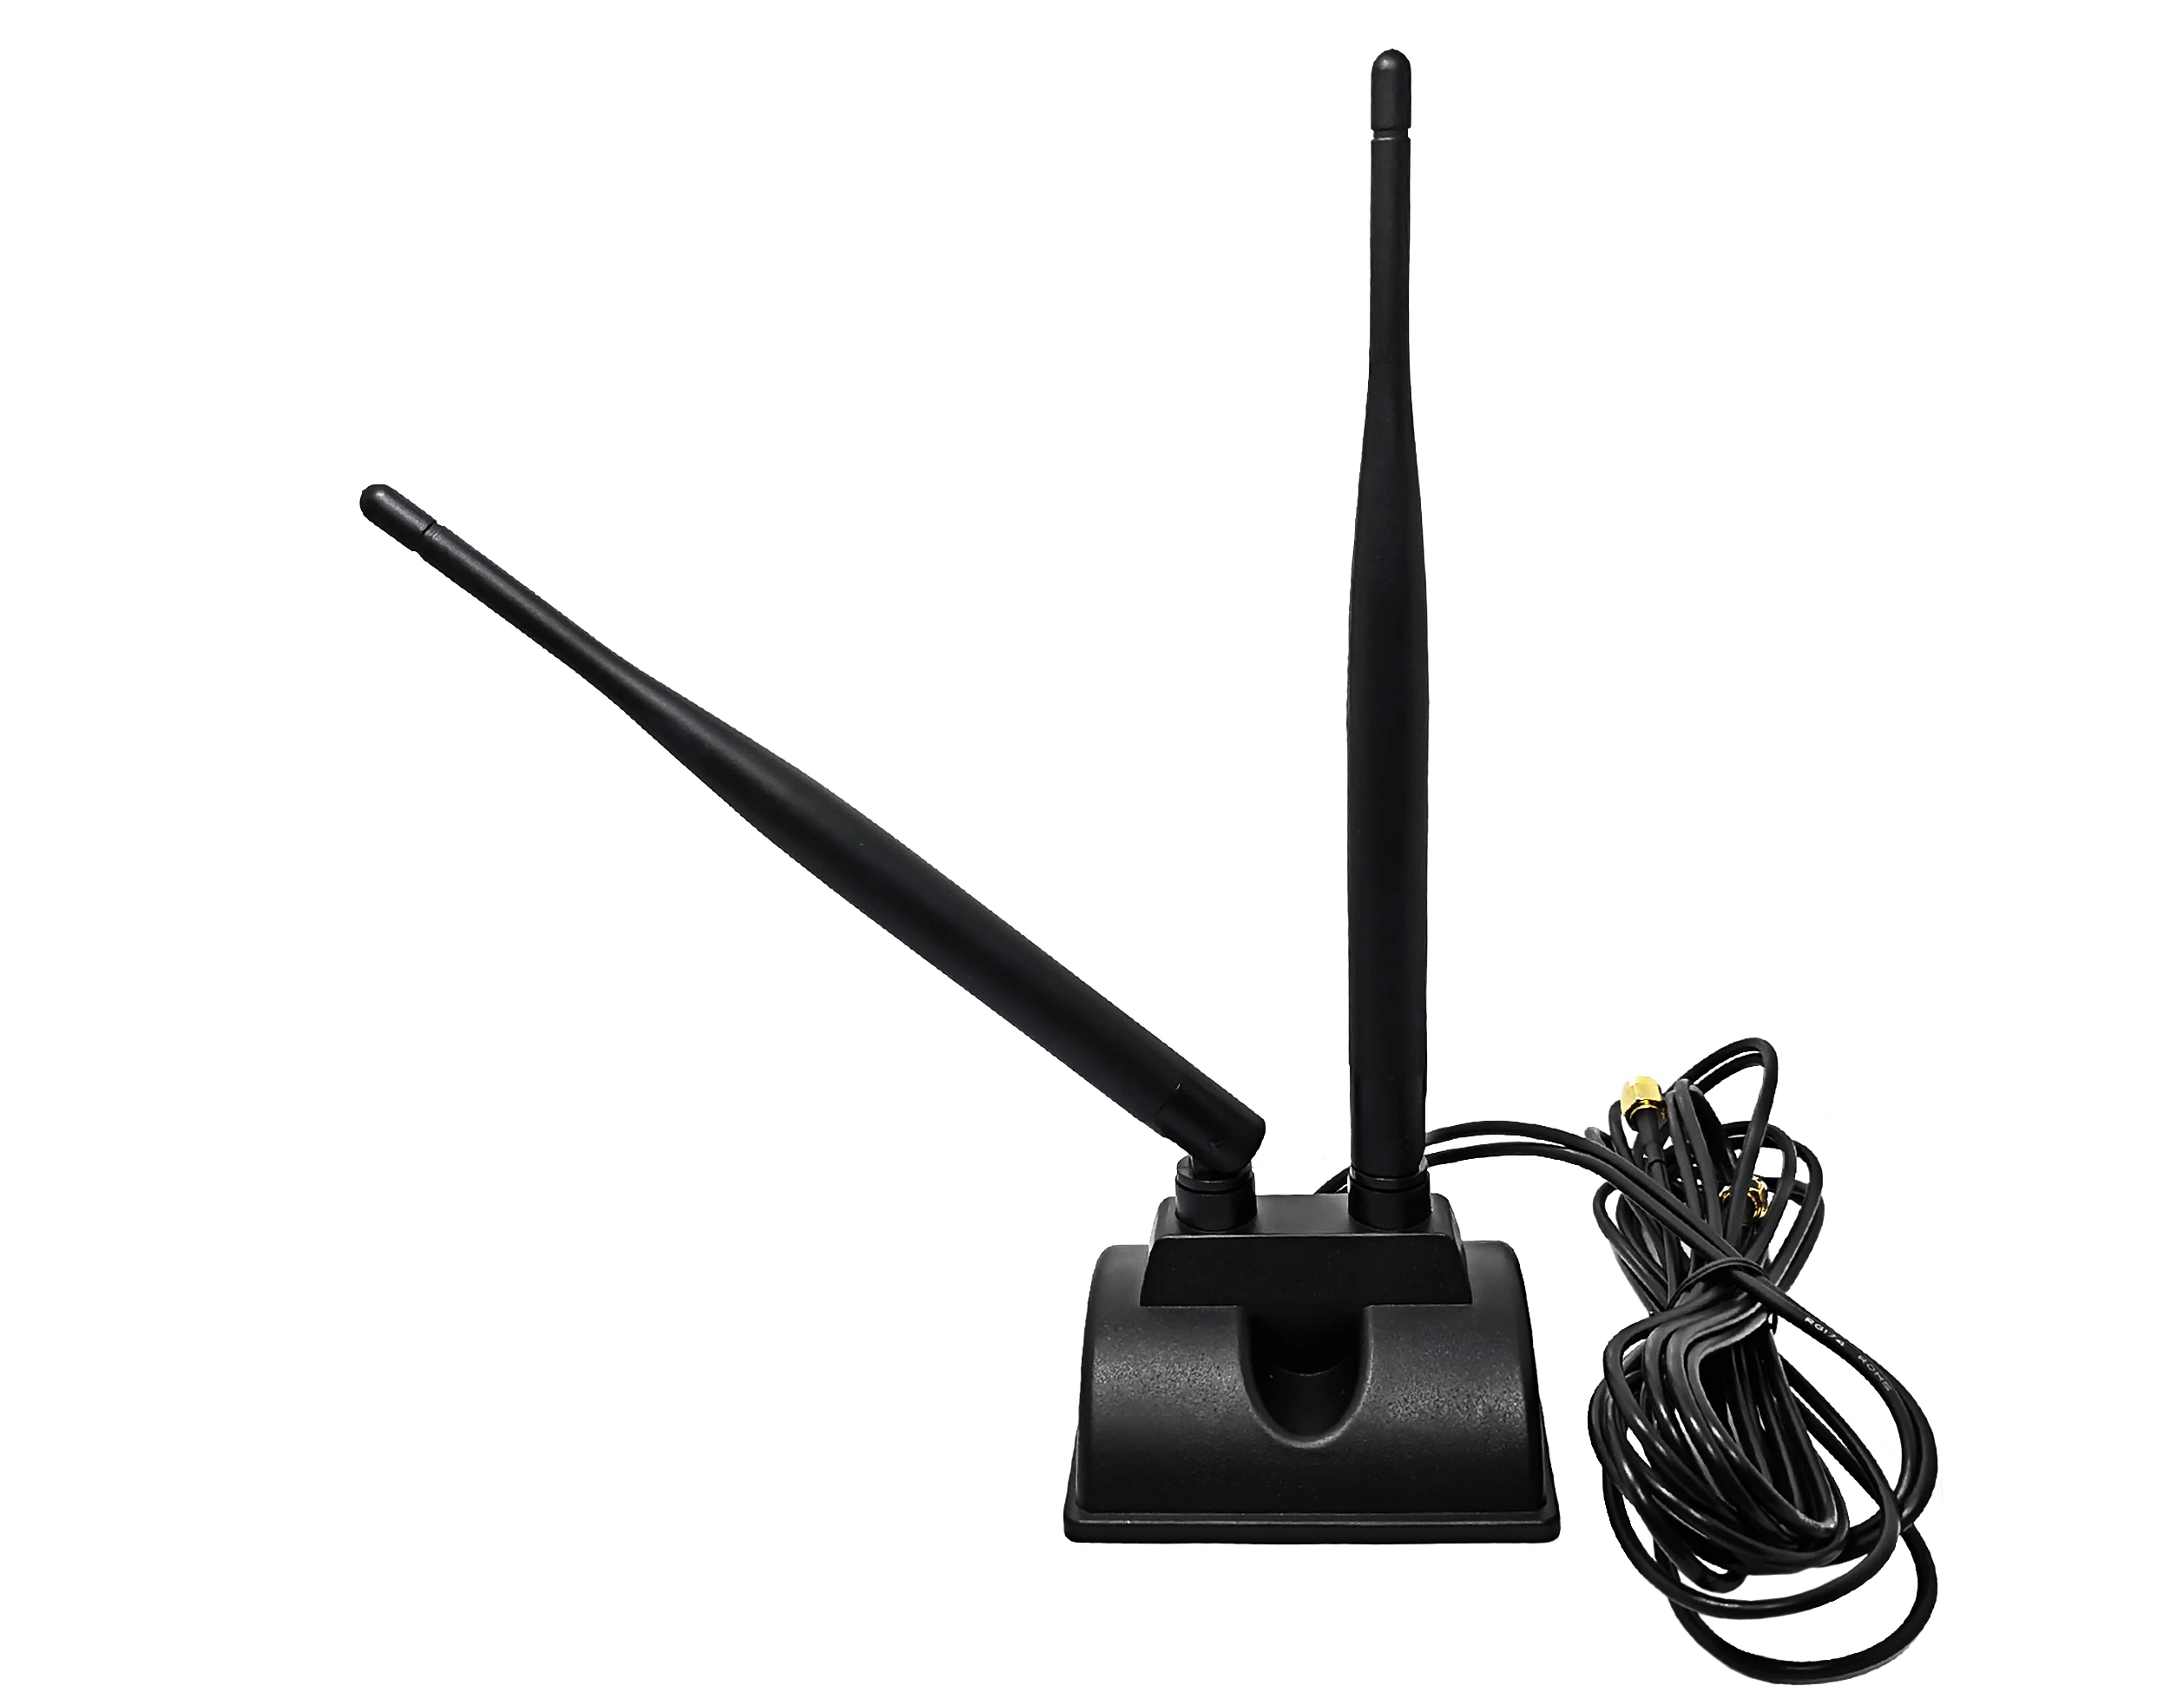 5G Gsm Gps repeater sma male  antenna Manufactory antennas wifi Router double frequency 2.4G Antenna manufacture